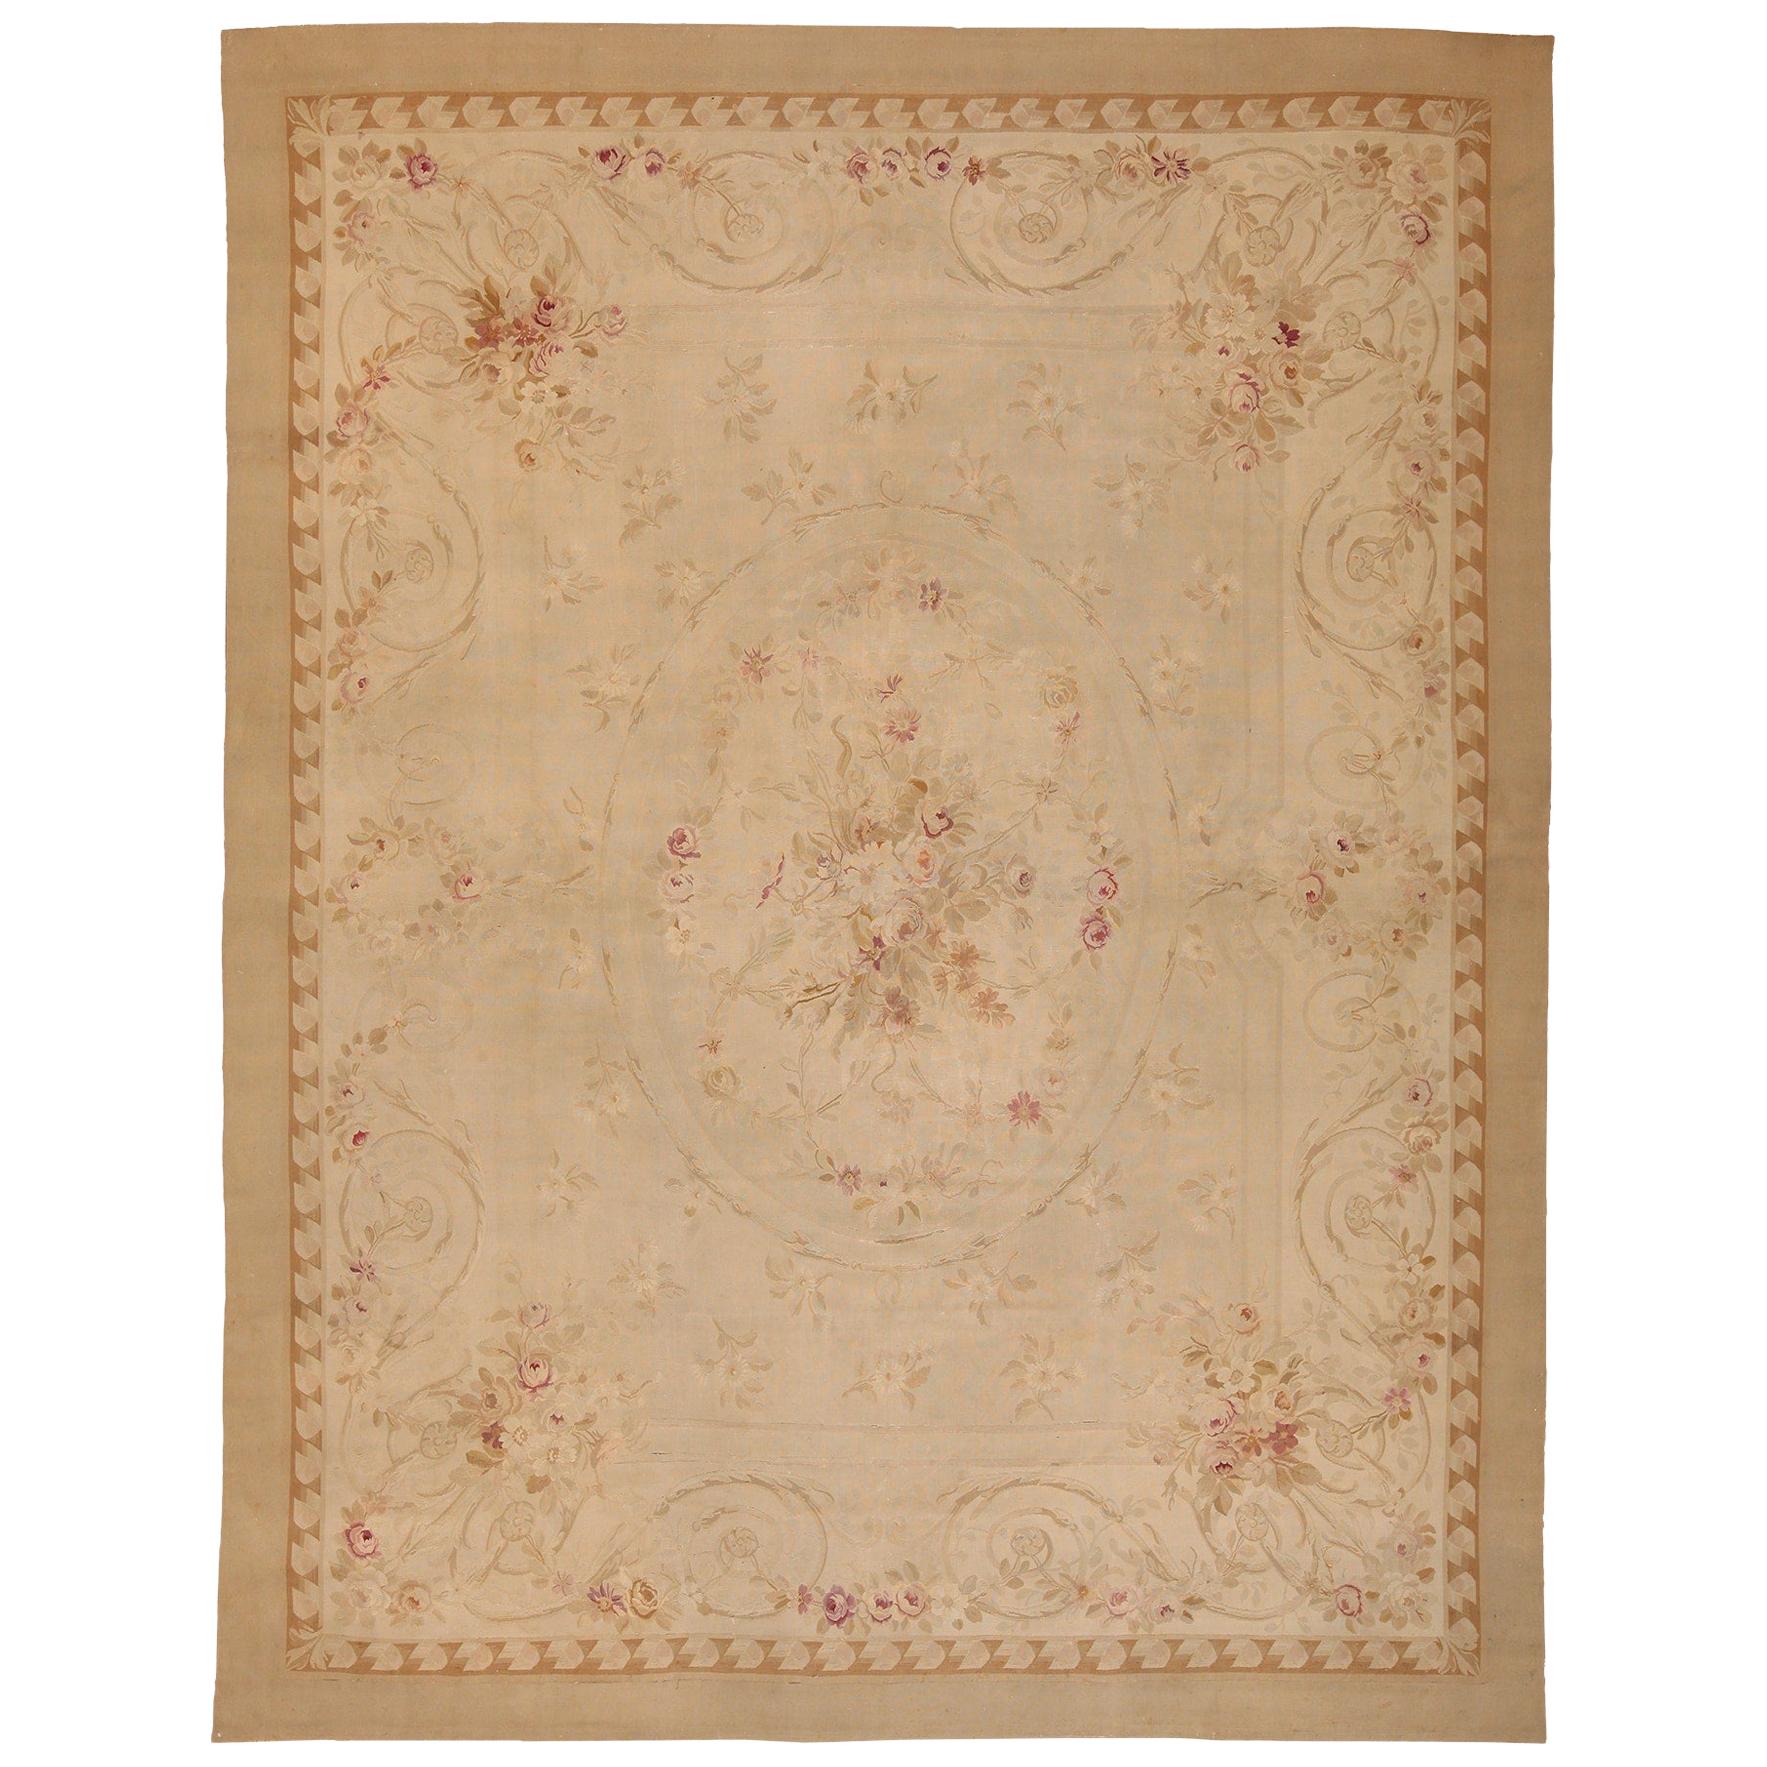 Antique Ivory French Aubusson Rug. Size: 10 ft x 13 ft 6 in  For Sale